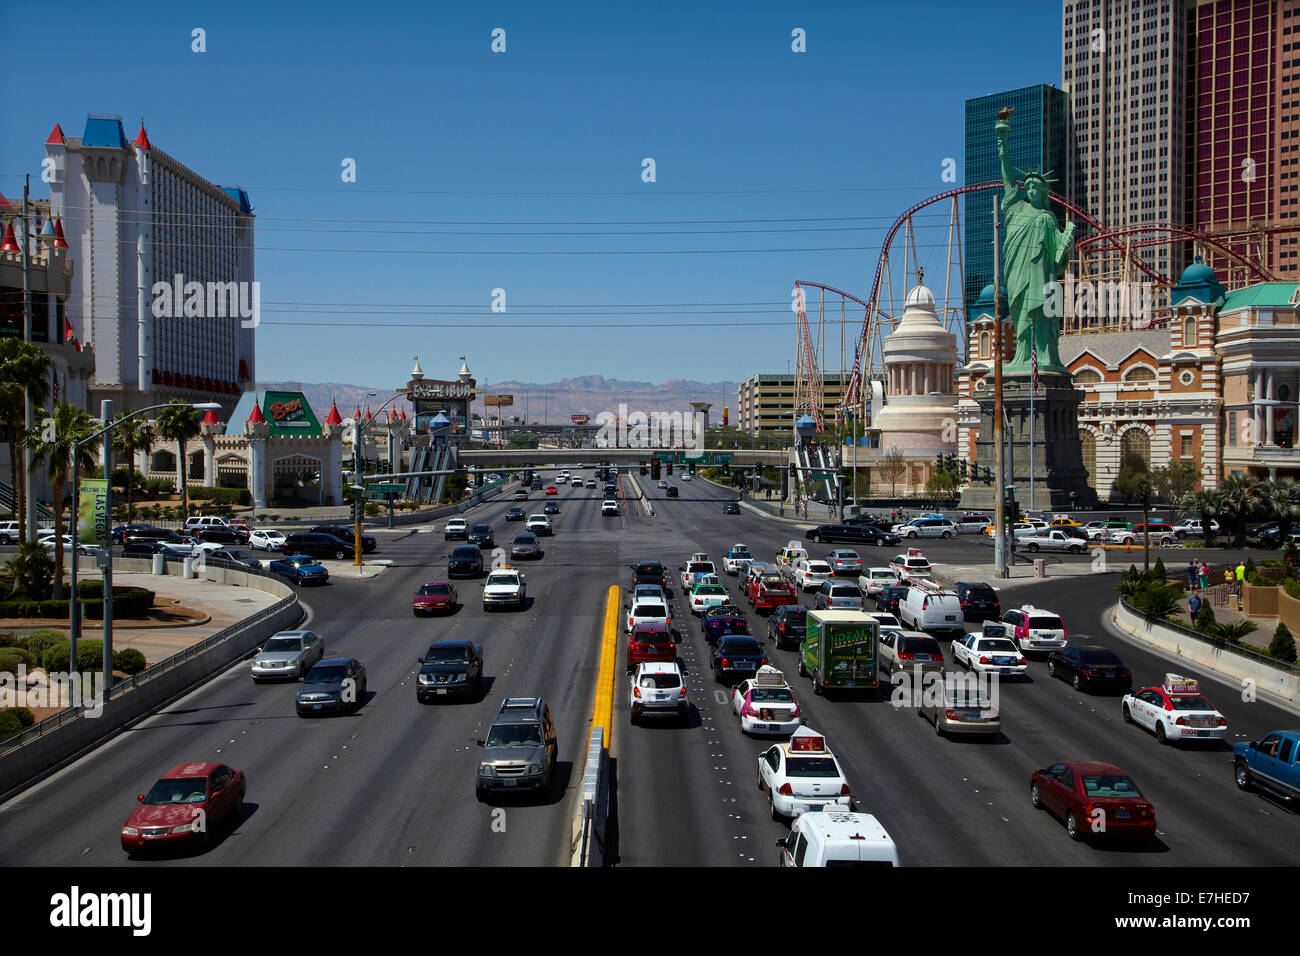 Traffic at the intersection of Tropicana Avenue and Las Vegas Boulevard (The Strip), Las Vegas, Nevada, USA Stock Photo